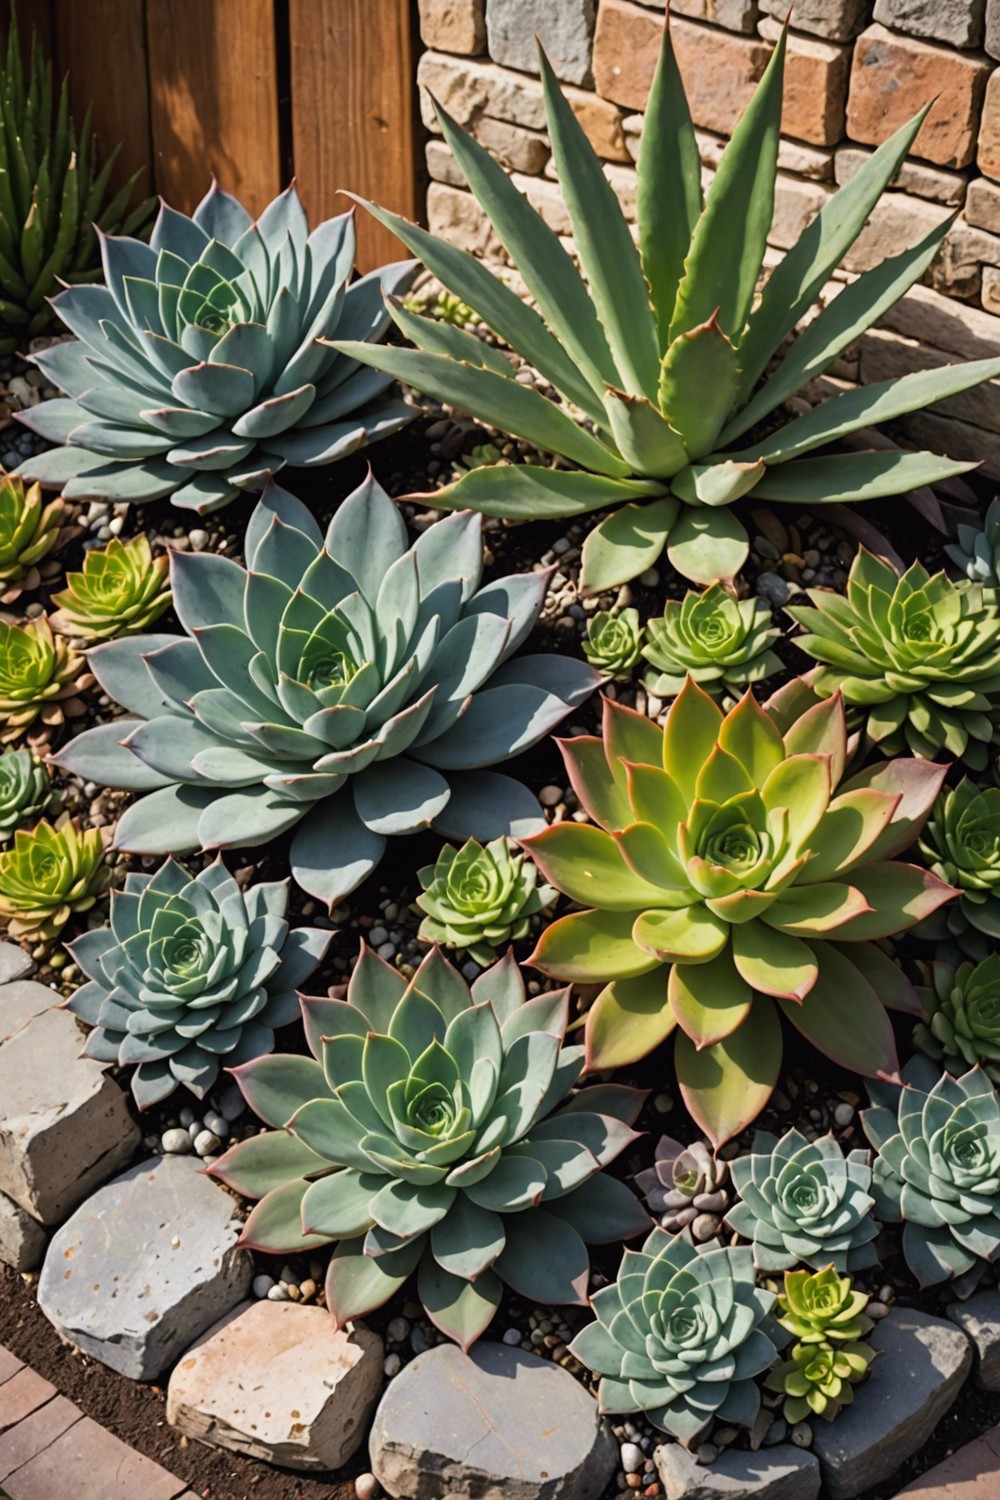 Mixed Succulent Gardens: Combining Textures and Colors